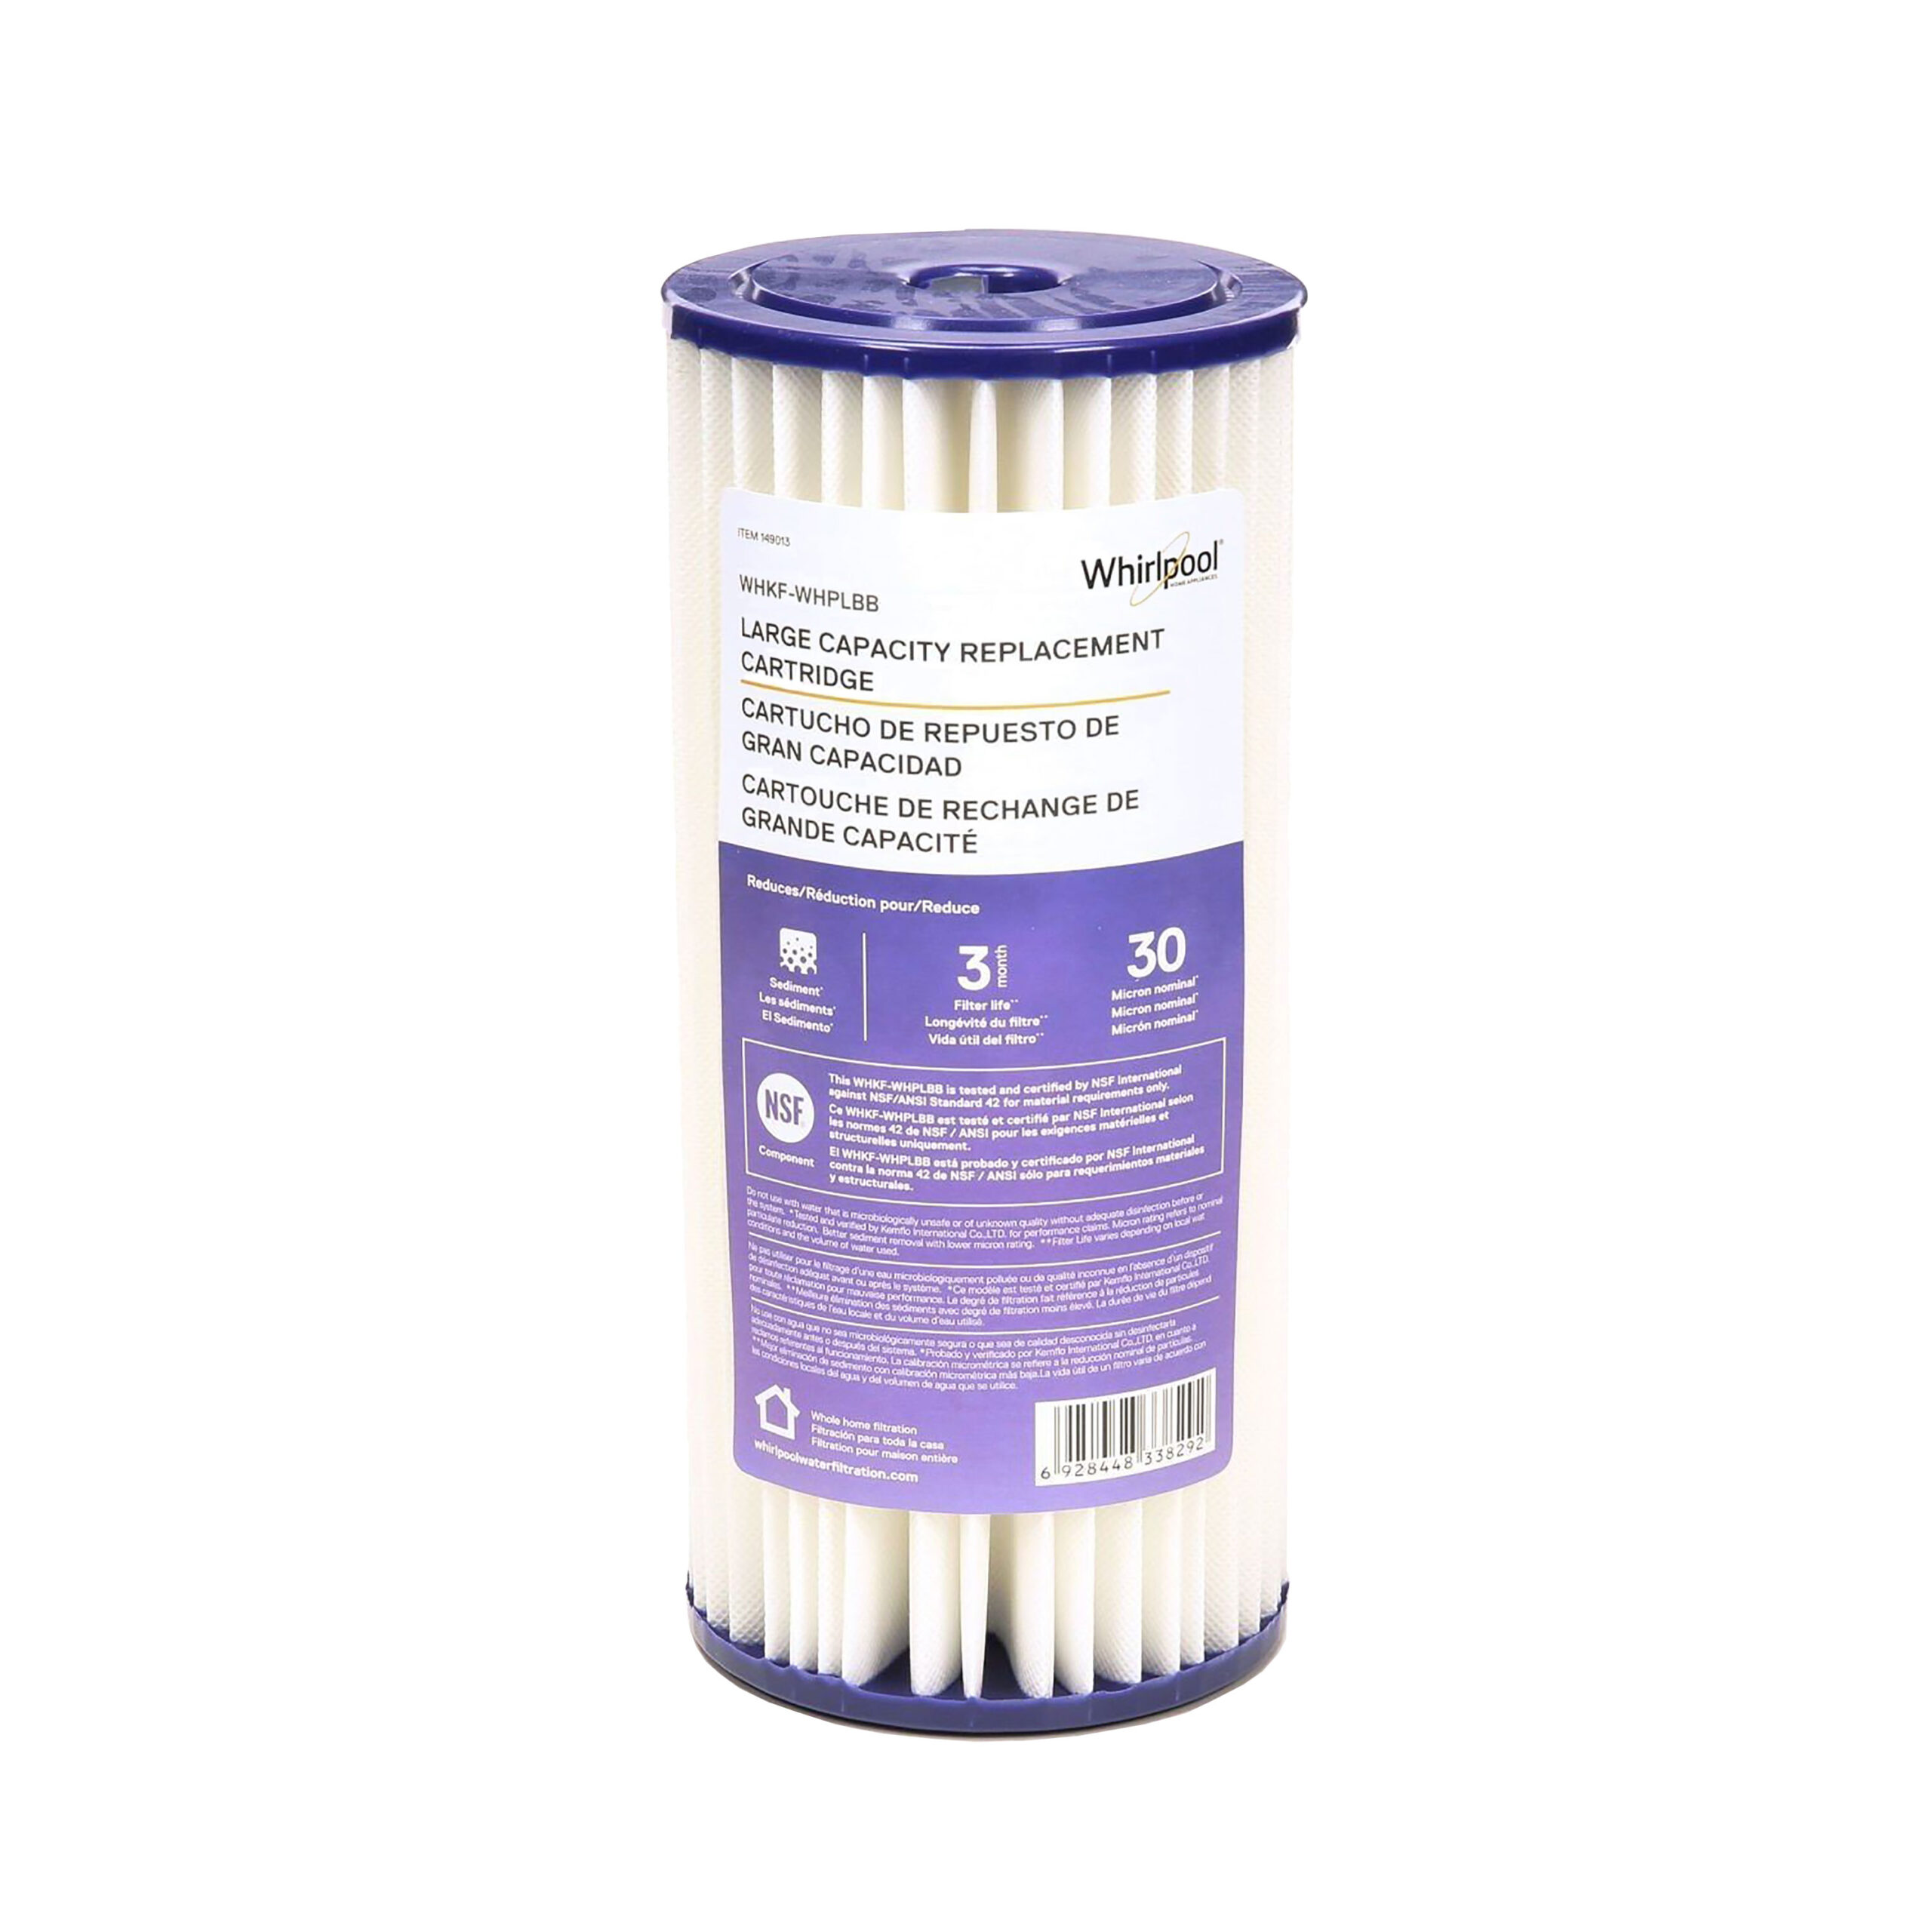 Whole -1 Filtration - Capacity pk Large Pleated WHKF-WHPLBB Home Whirlpool® Filter Whirlpool Water